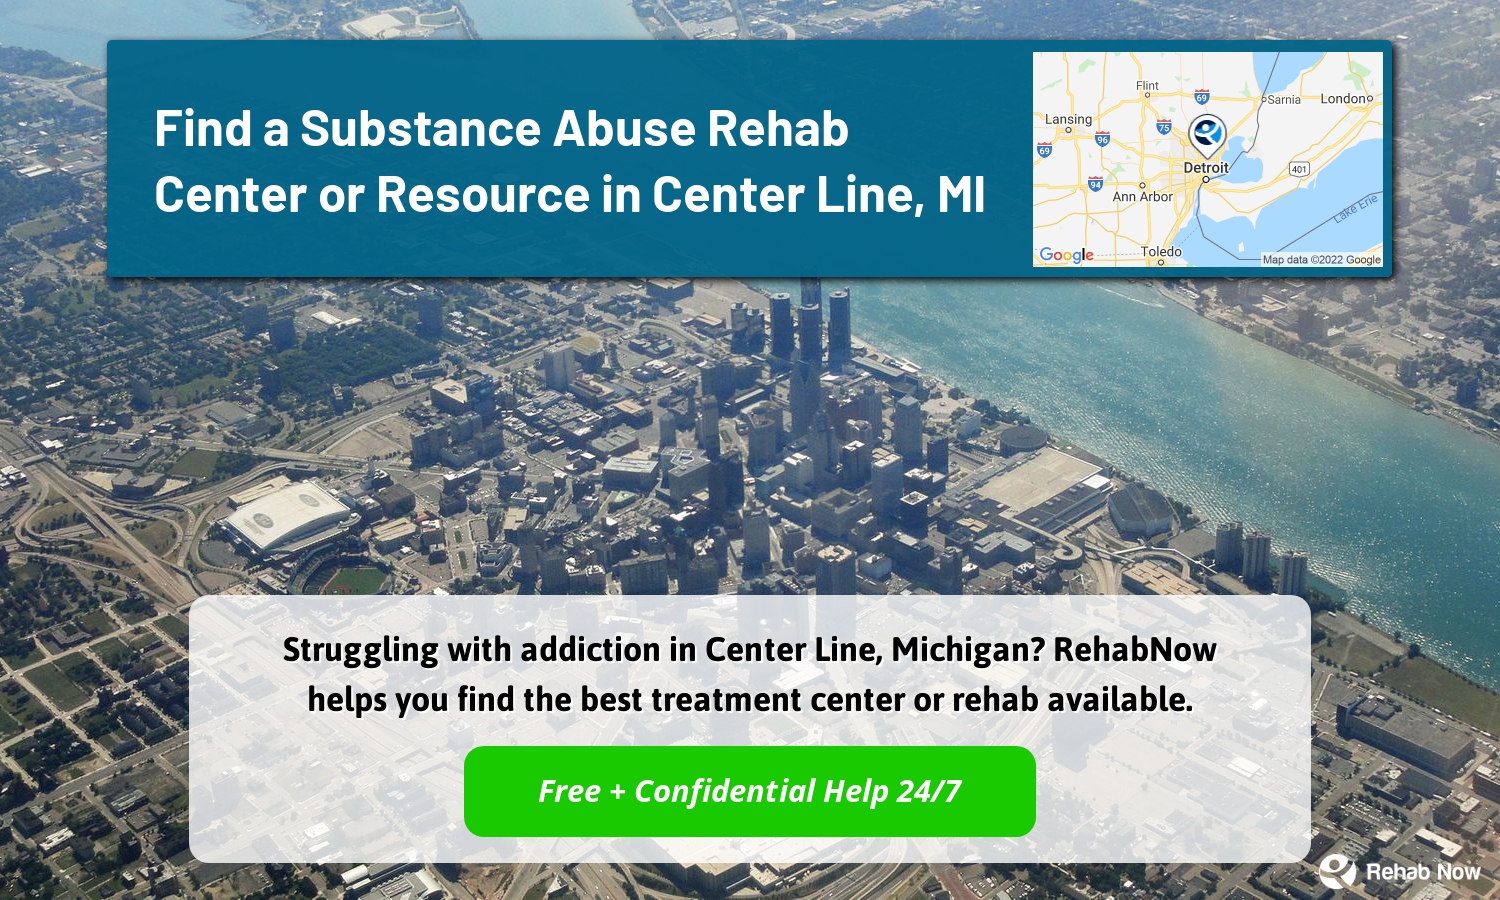 Struggling with addiction in Center Line, Michigan? RehabNow helps you find the best treatment center or rehab available.